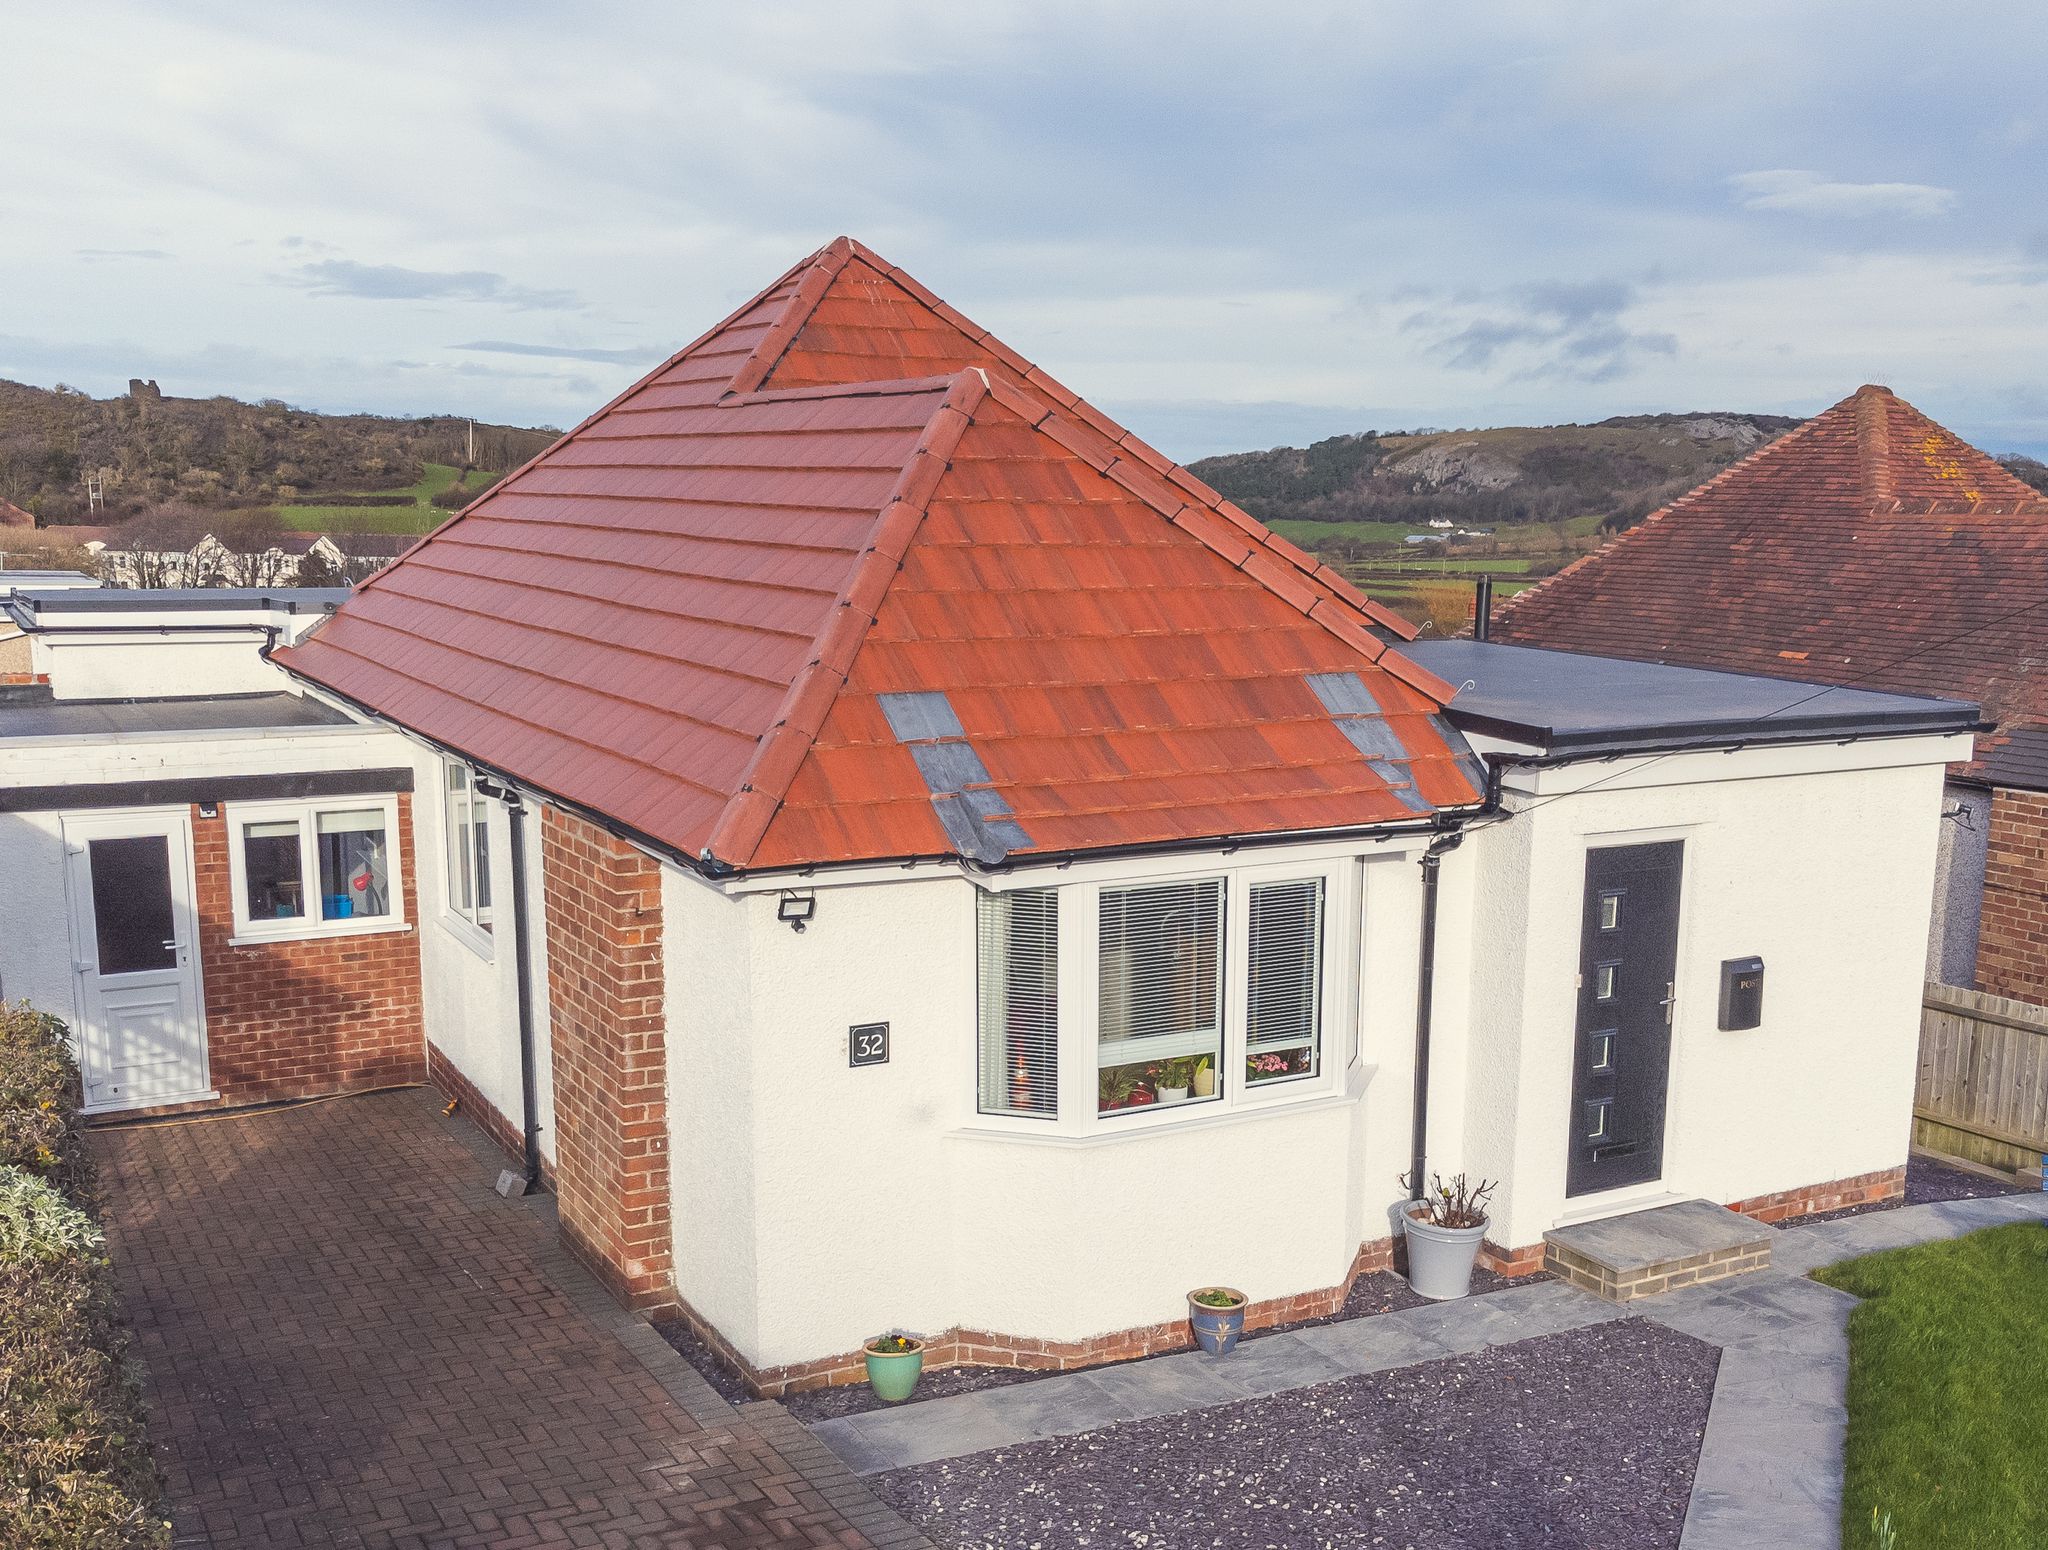 Tile Roof Contractors Bryncir, LL51 - DD Roofing